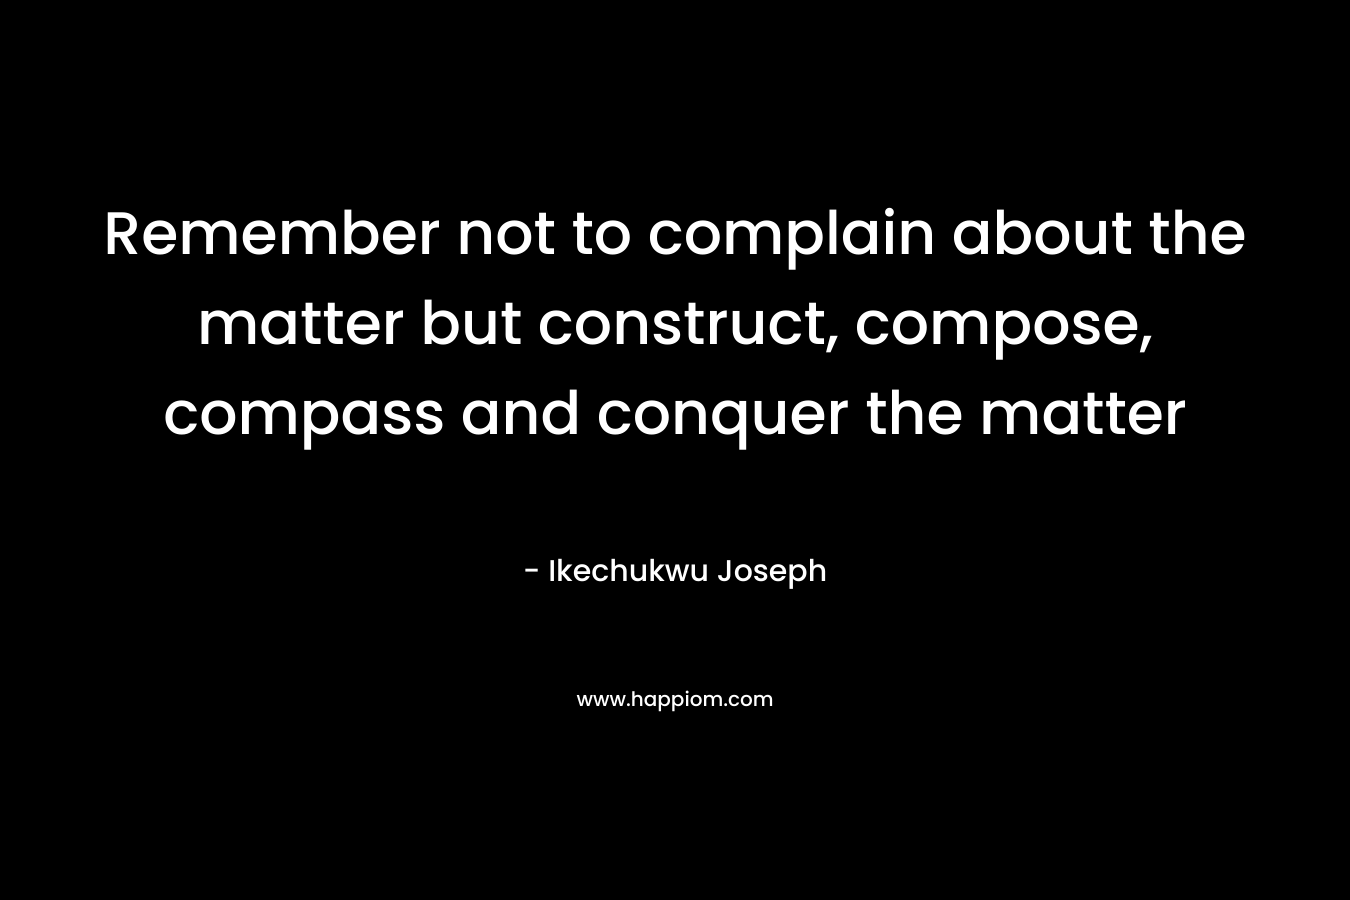 Remember not to complain about the matter but construct, compose, compass and conquer the matter – Ikechukwu Joseph